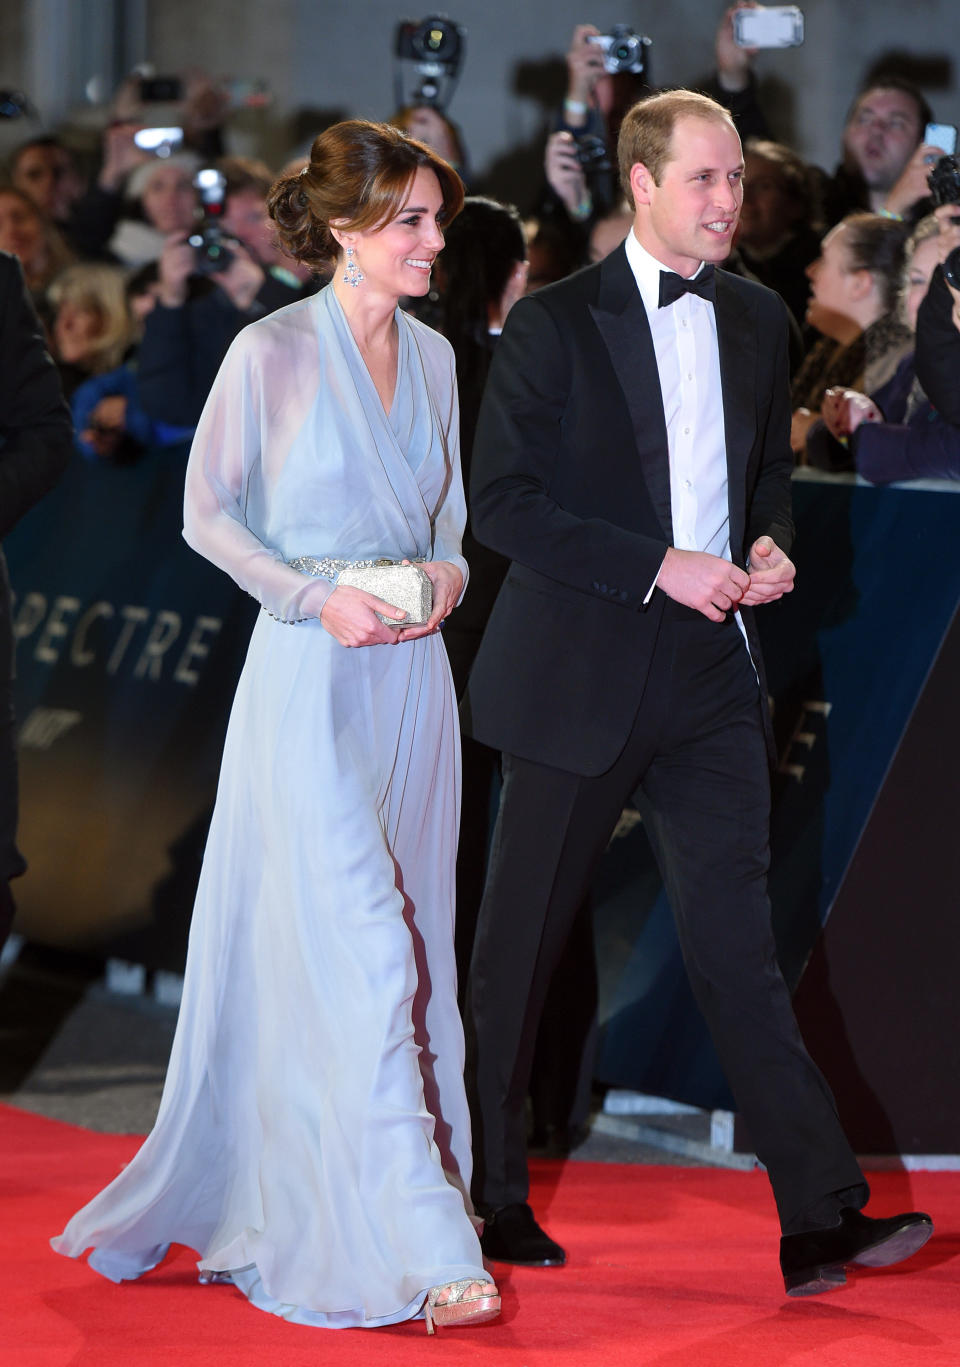 Catherine, Duchess of Cambridge, and Prince William, Duke of Cambridge, attend the Royal Film Performance of "Spectre" at the Royal Albert Hall on Oct. 26 in London.